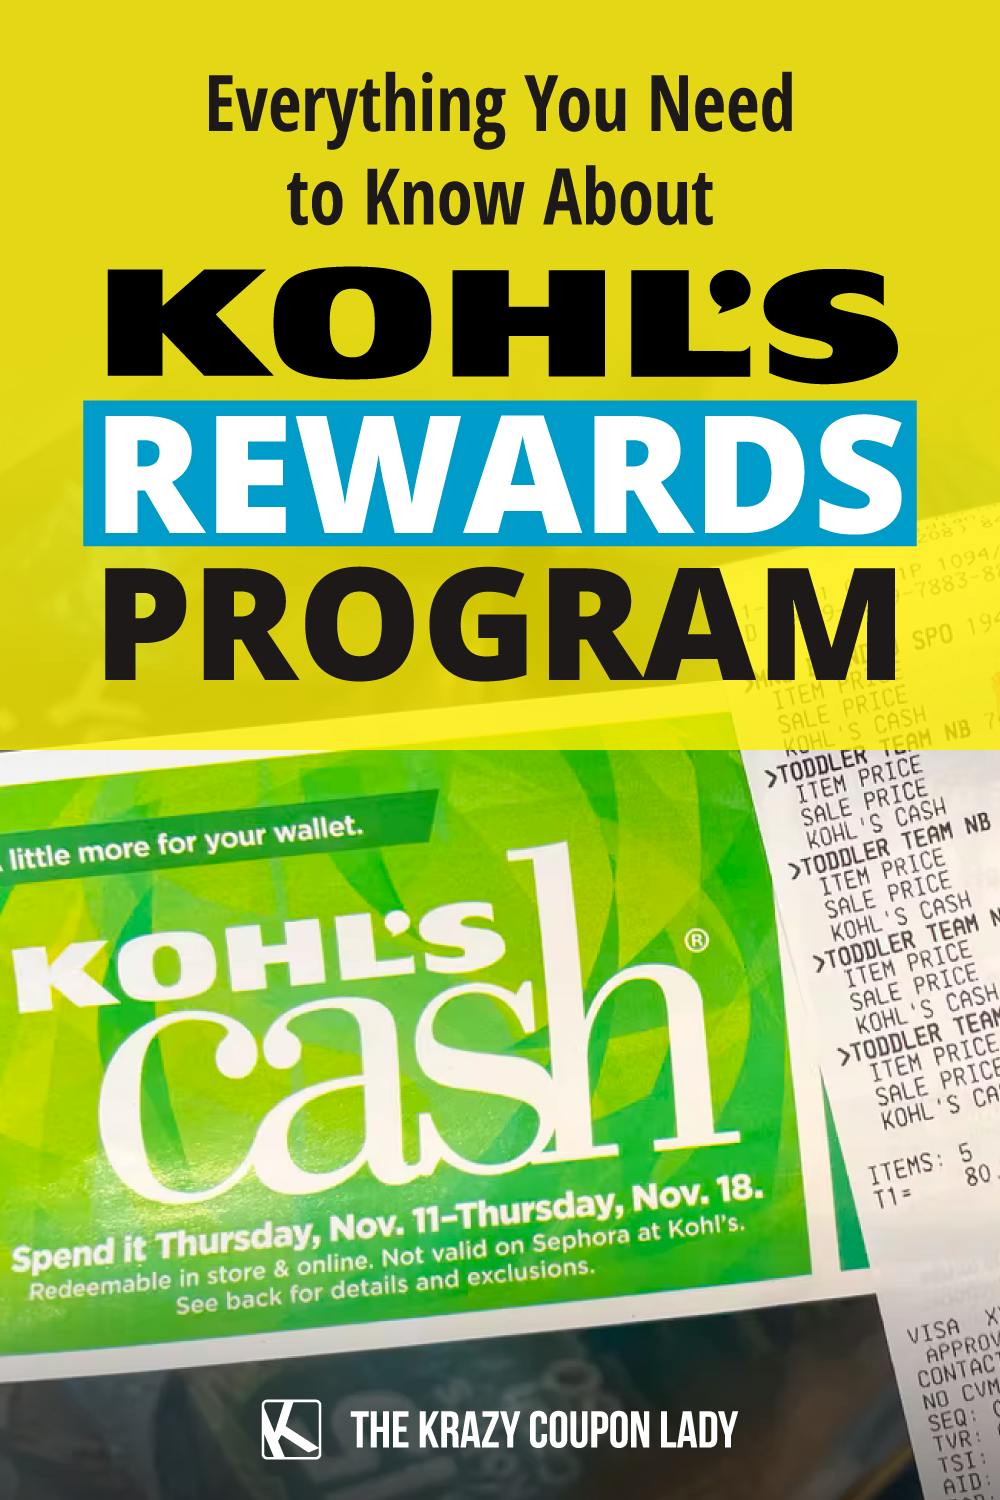 Everything You Need to Know About Kohl's Rewards Program